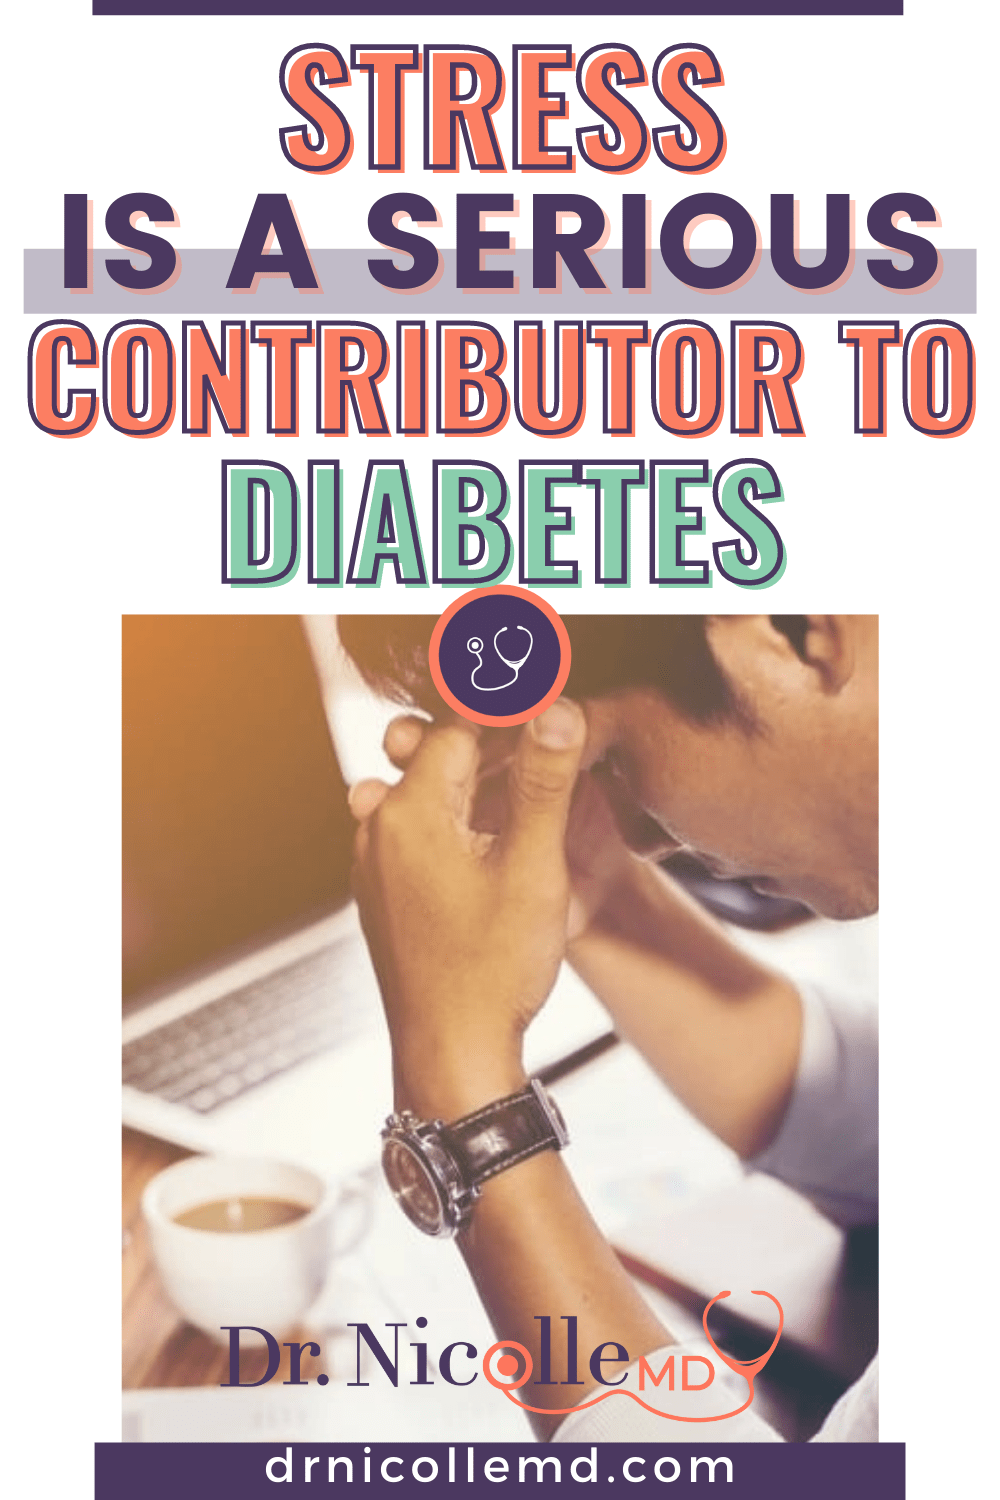 Stress is a Serious Contributor to Diabetes